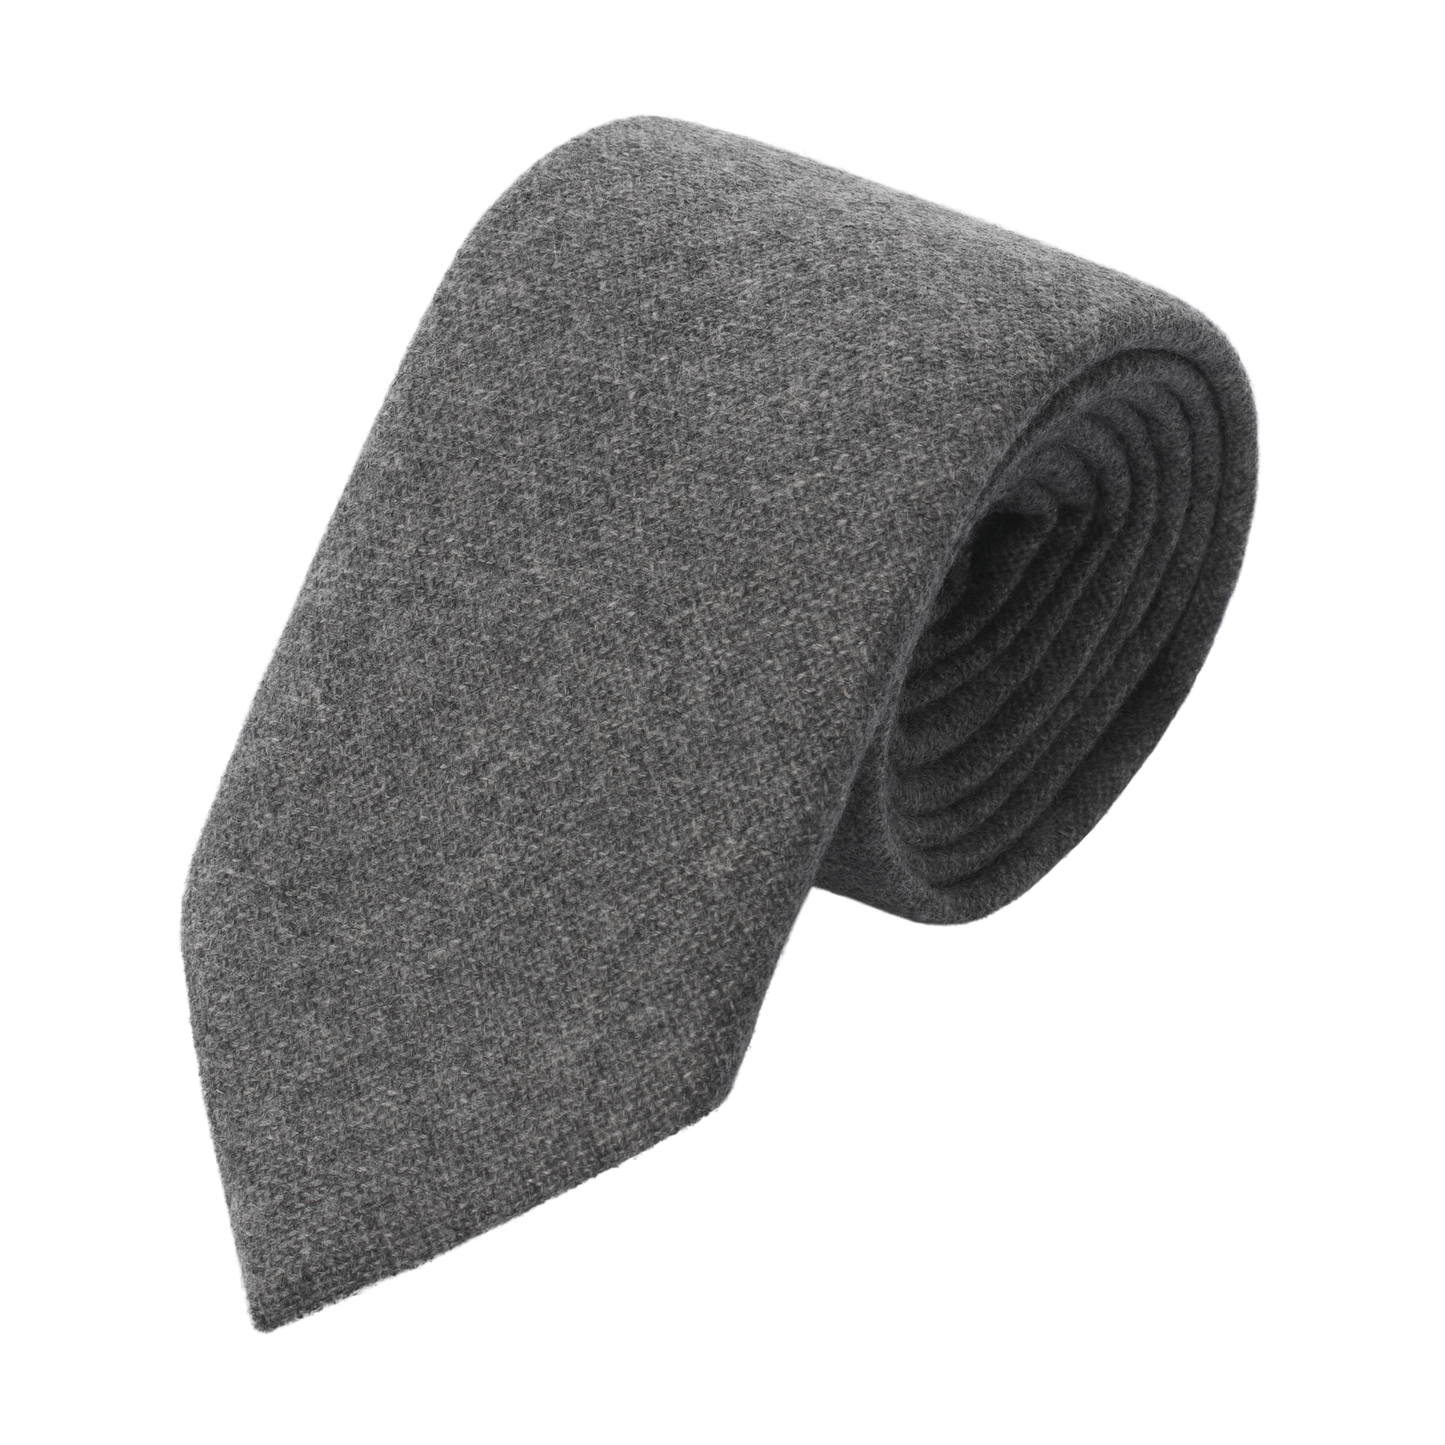 Woven Cashmere Tipped Tie in Light Grey